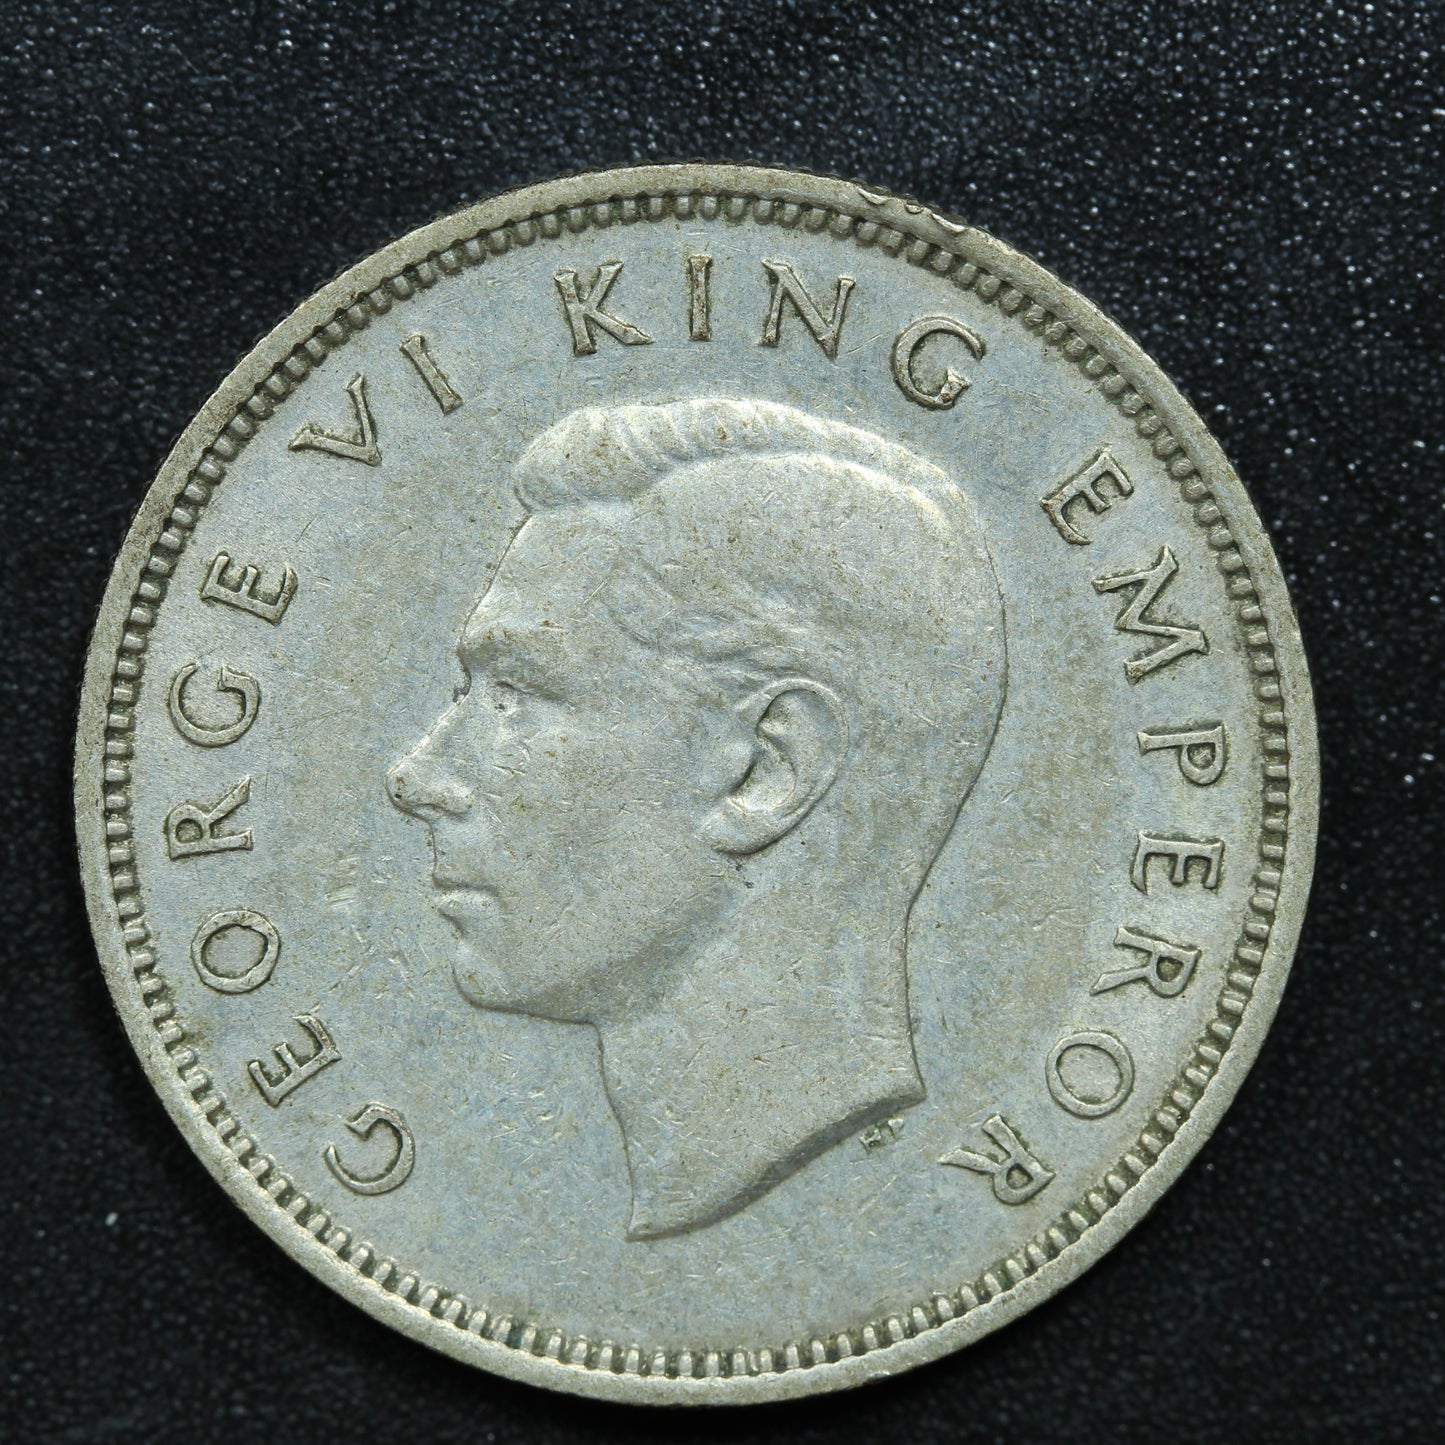 1940 New Zealand NZ One Shilling Silver Coin - KM# 9